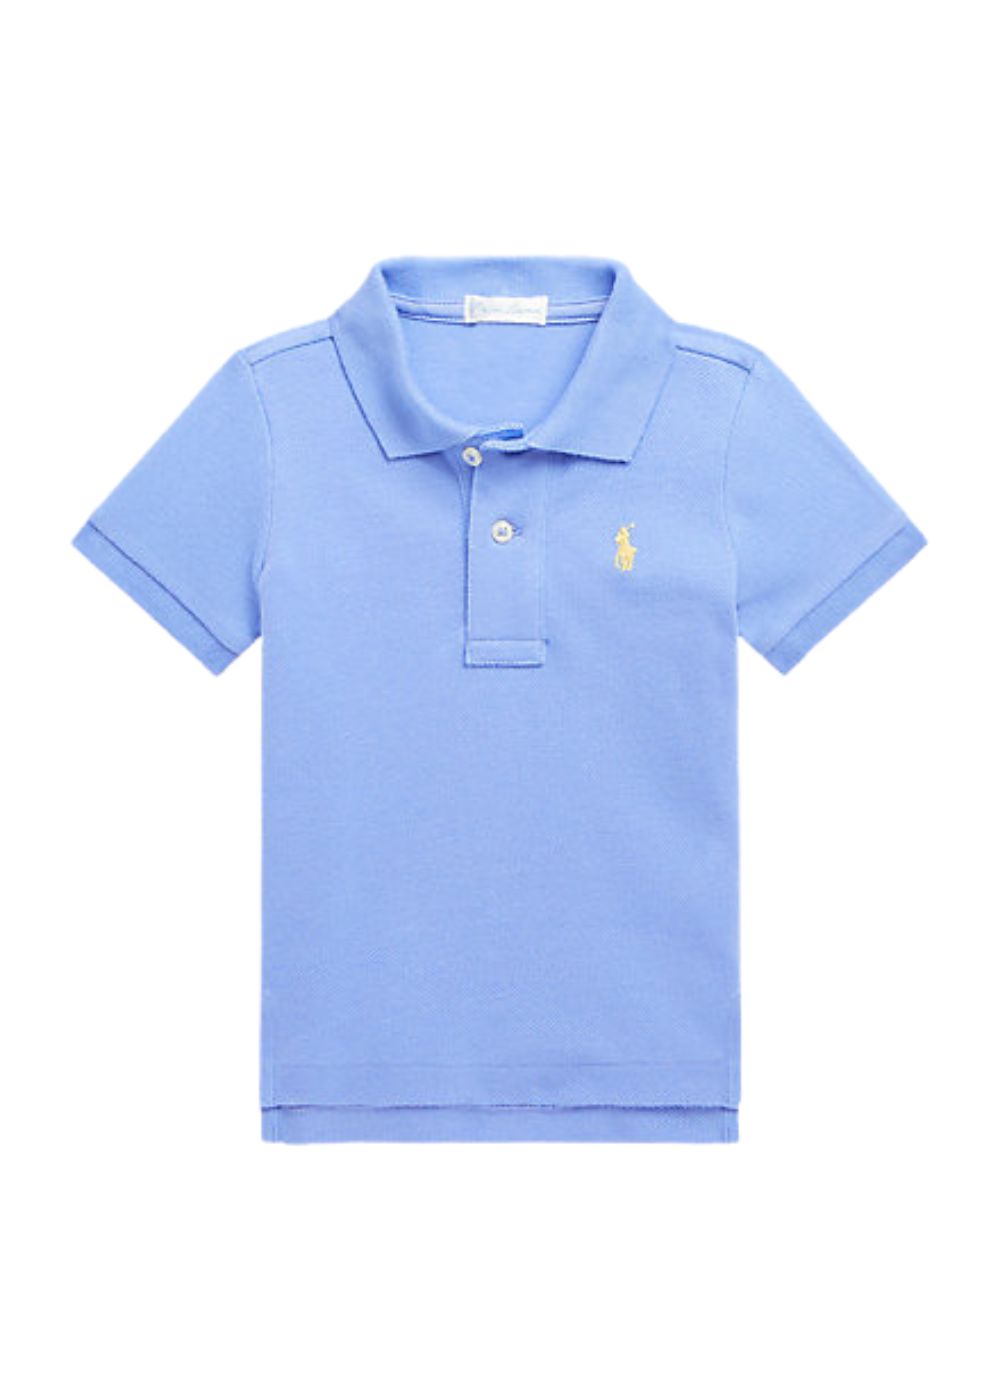 Featured image for “Polo Ralph Lauren Polo in cotone”